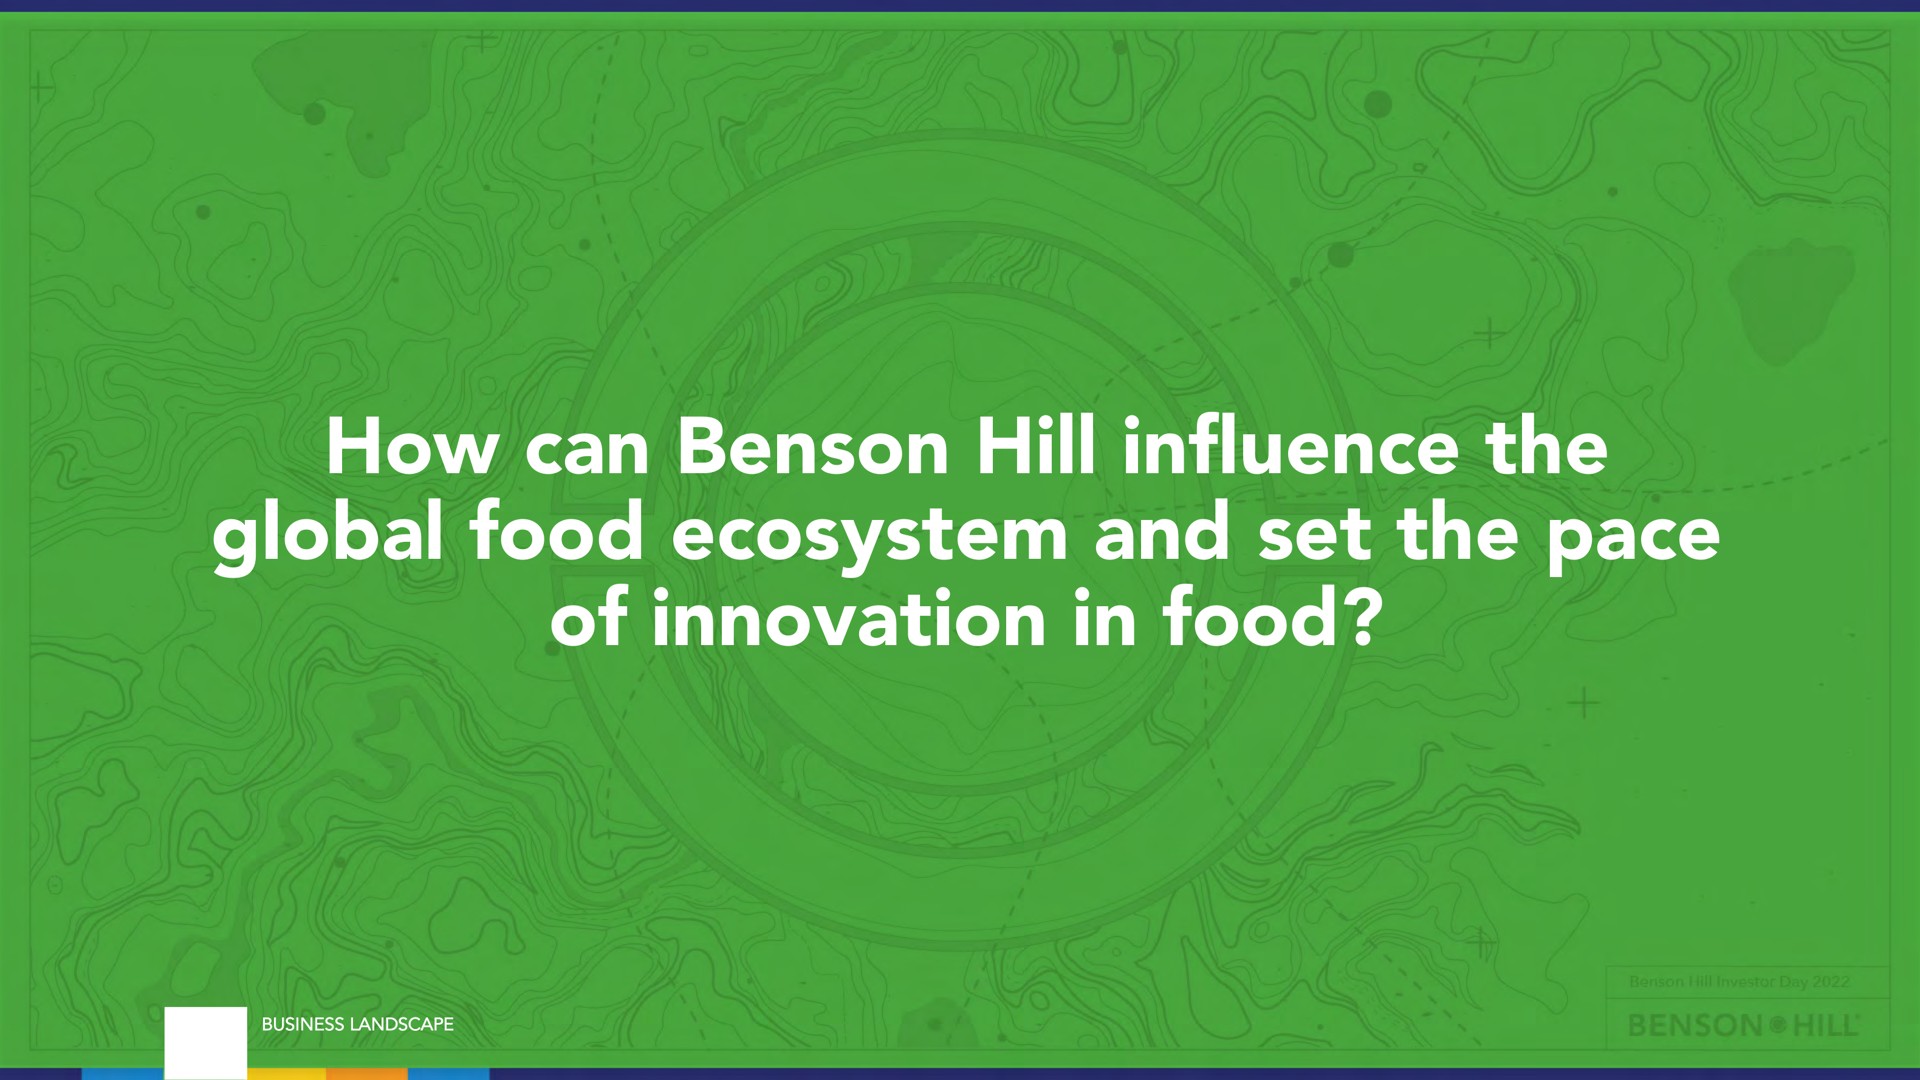 how can hill in the global food ecosystem and set the pace of innovation in food influence | Benson Hill